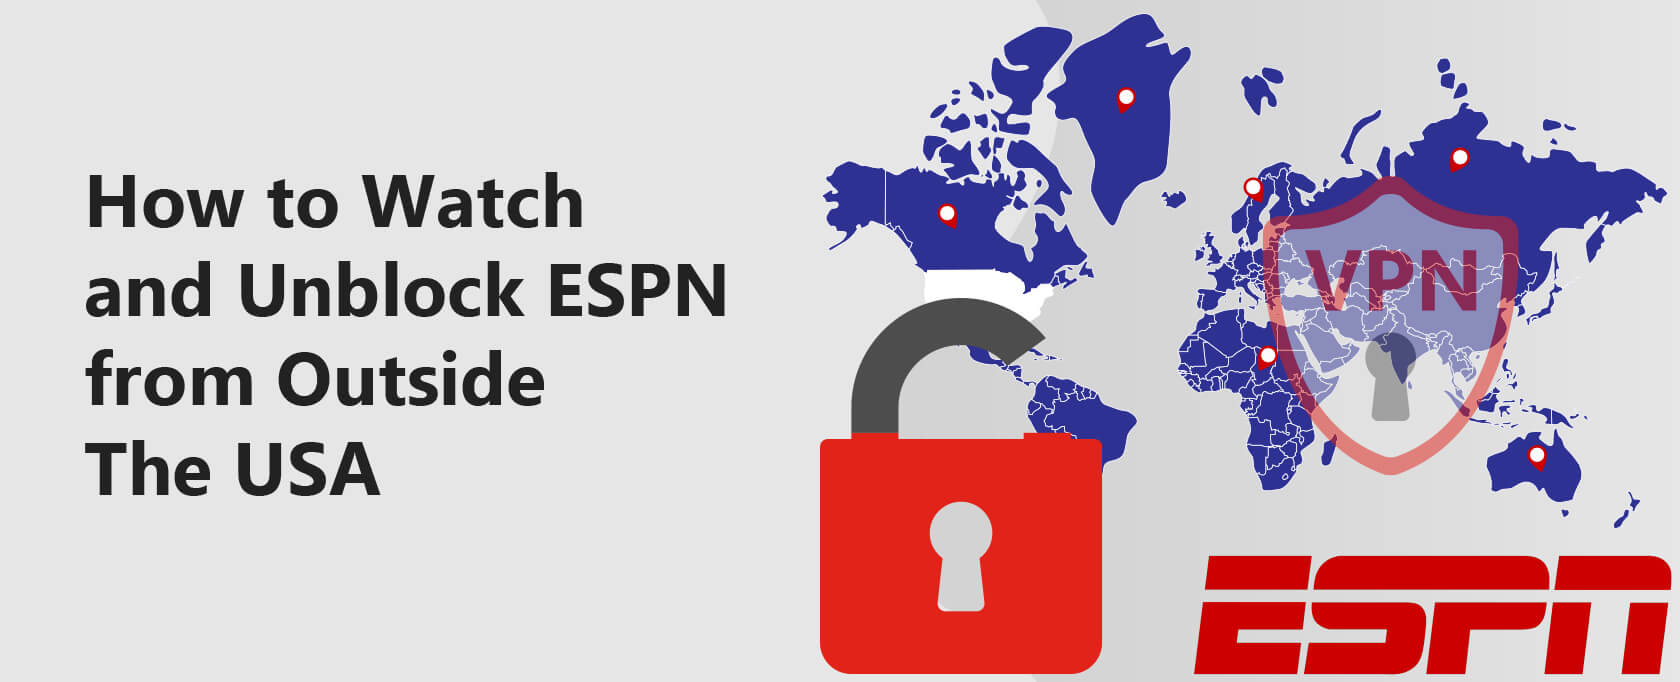 ESPN VPN: How to Watch and Unblock ESPN from Outside The USA